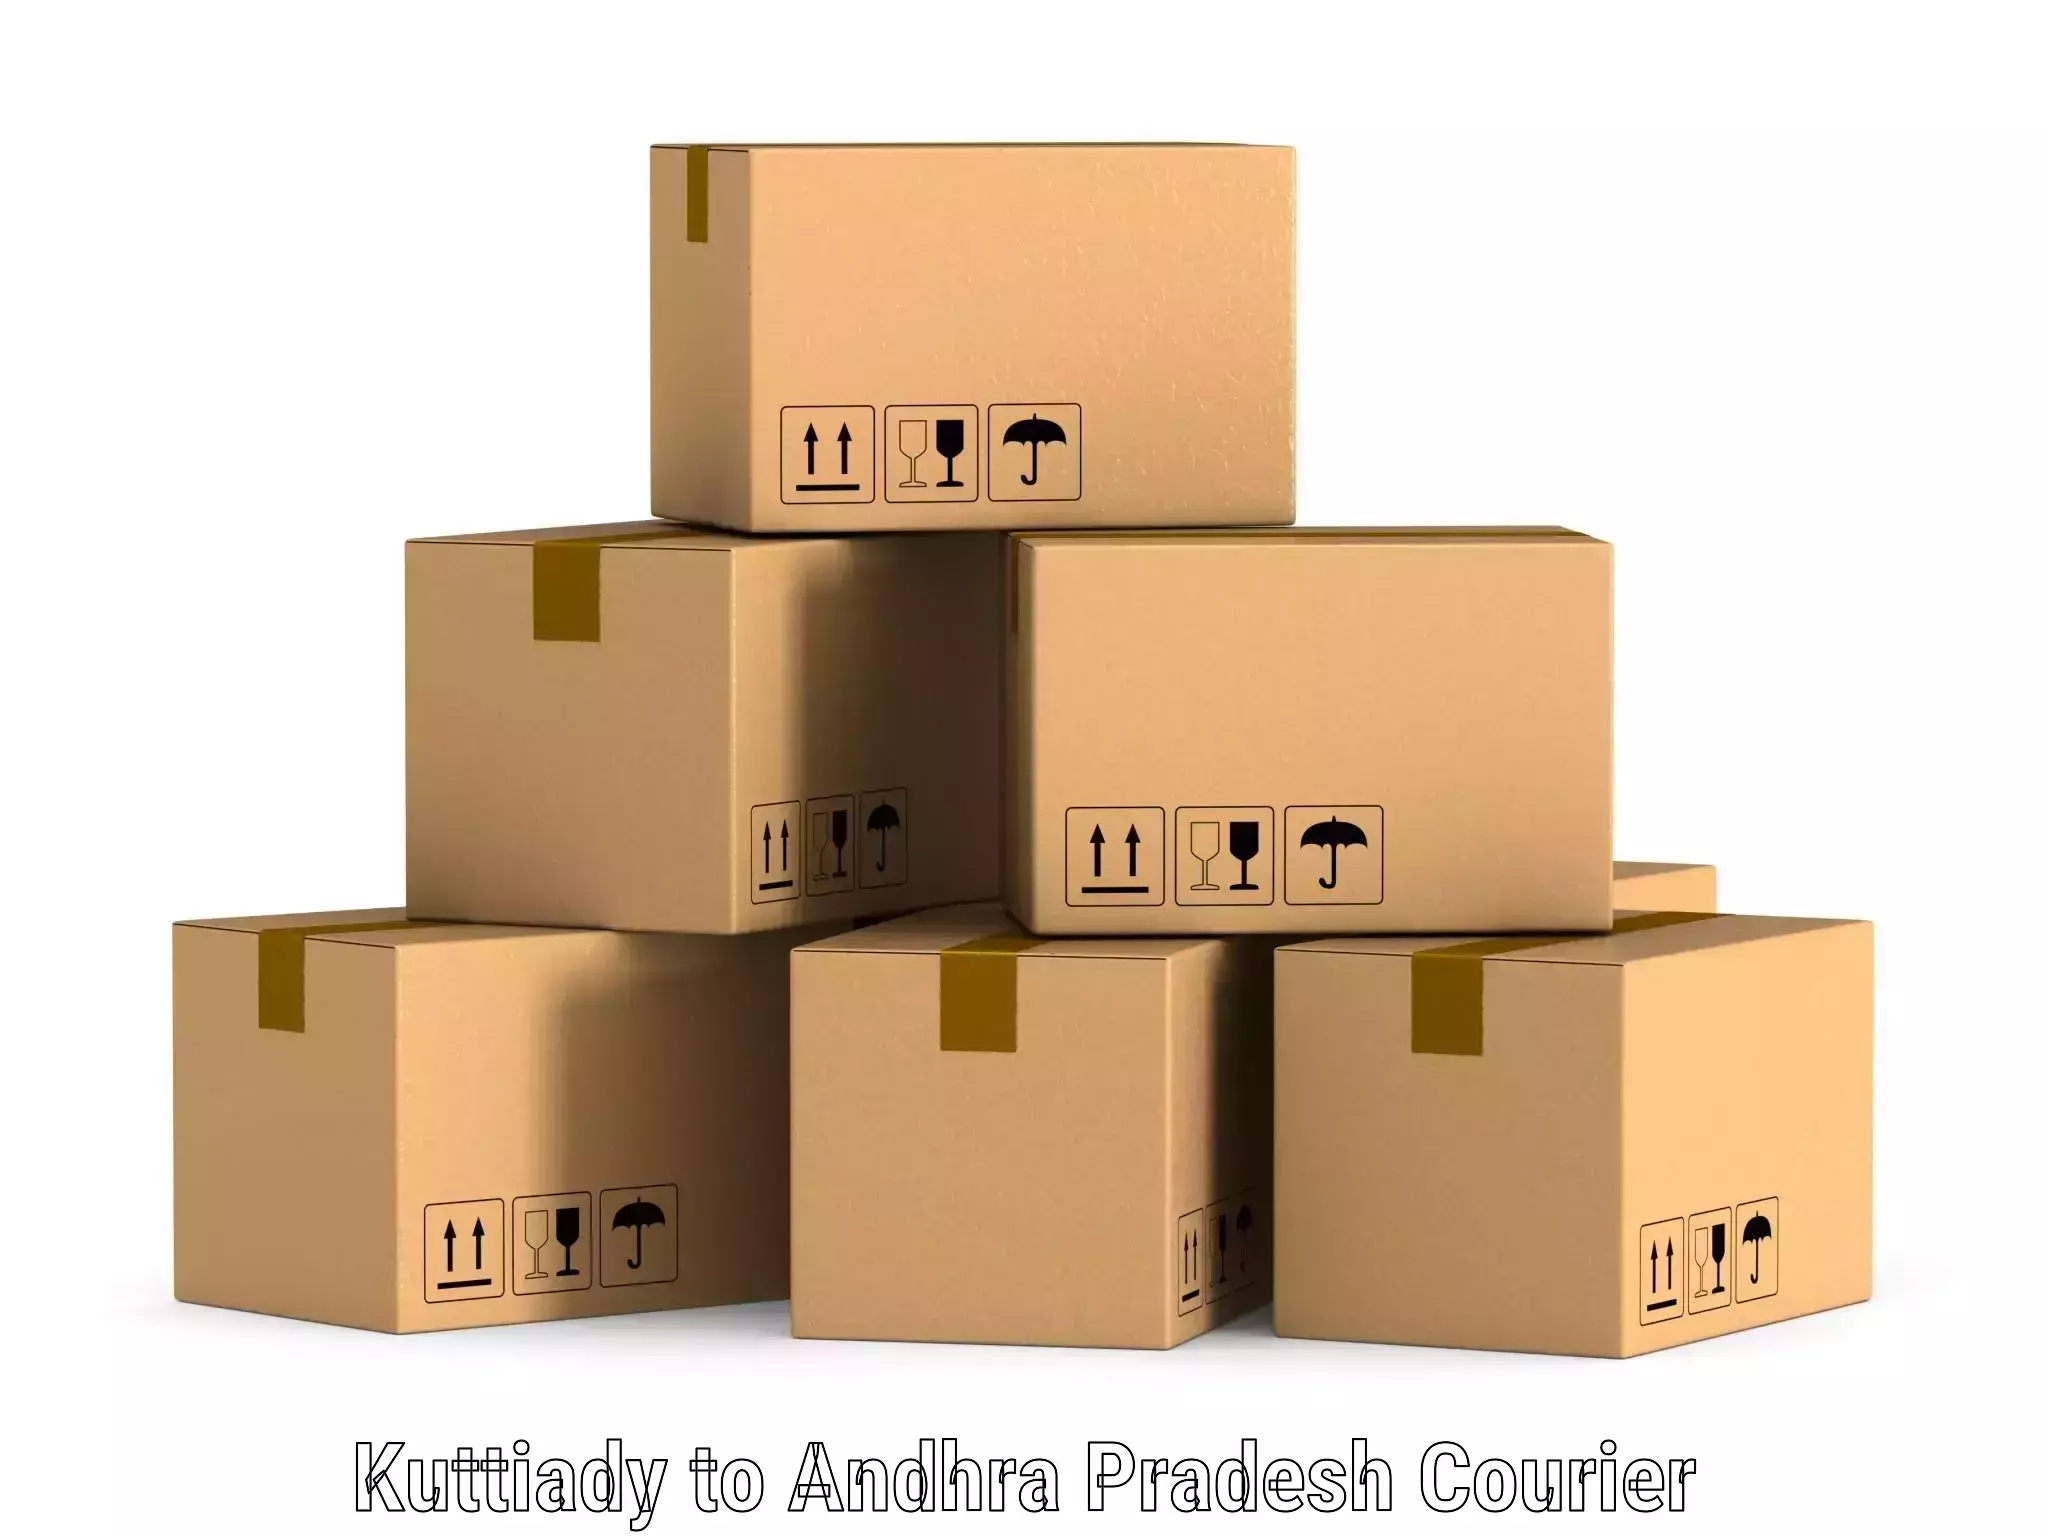 Multi-national courier services Kuttiady to Andhra Pradesh